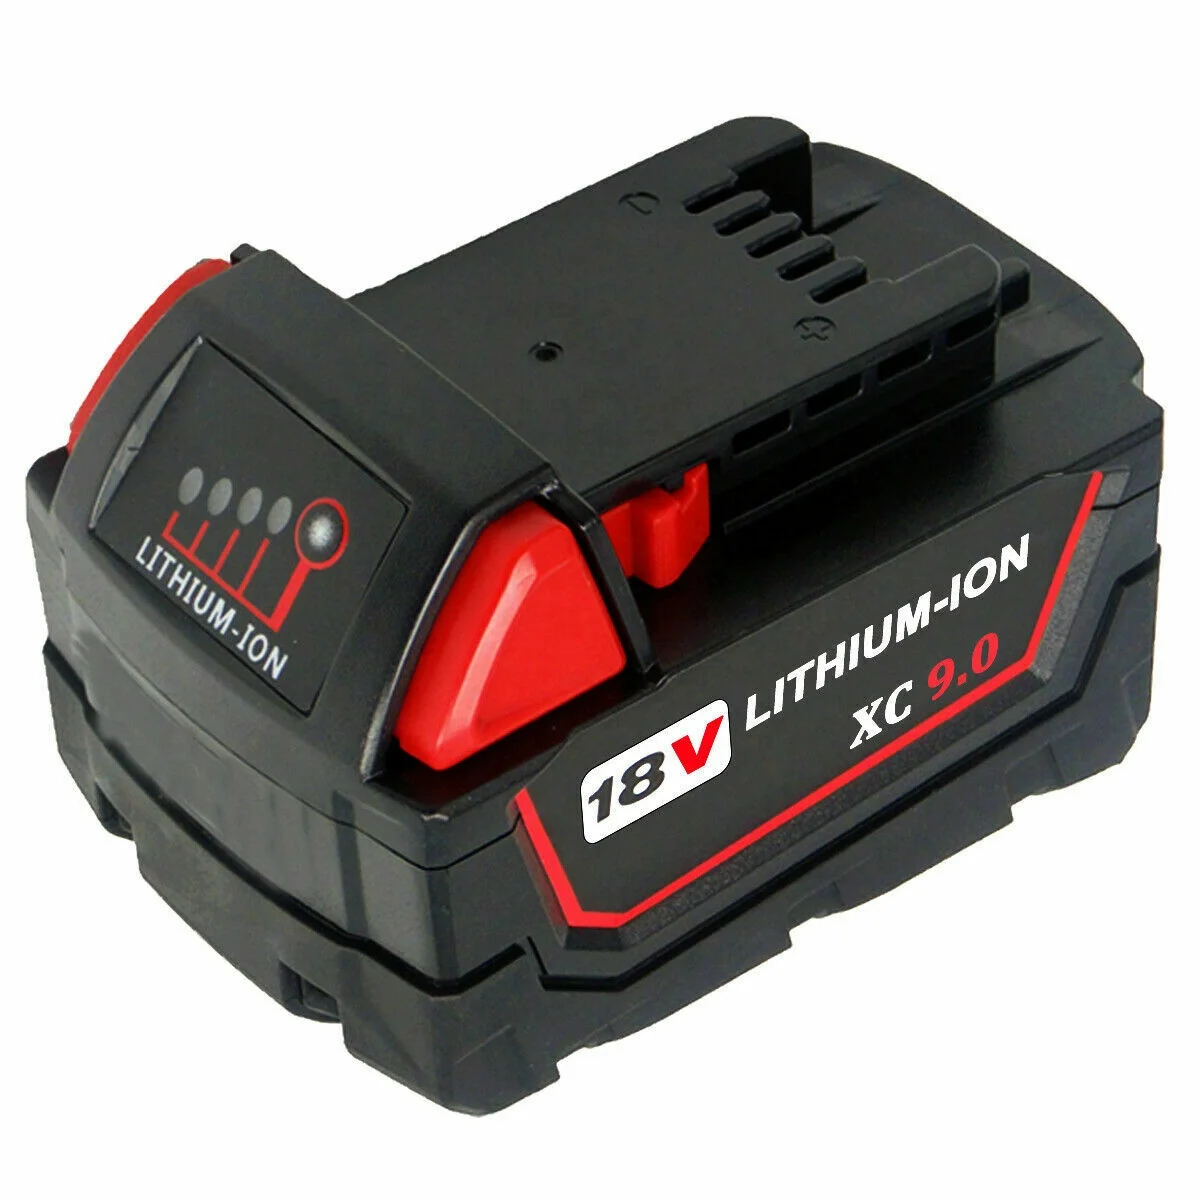 Replacement milwaukee M18 18v lithium ion battery pack 4ah 5ah 6ah 9ah 12ah for power tool combo kit